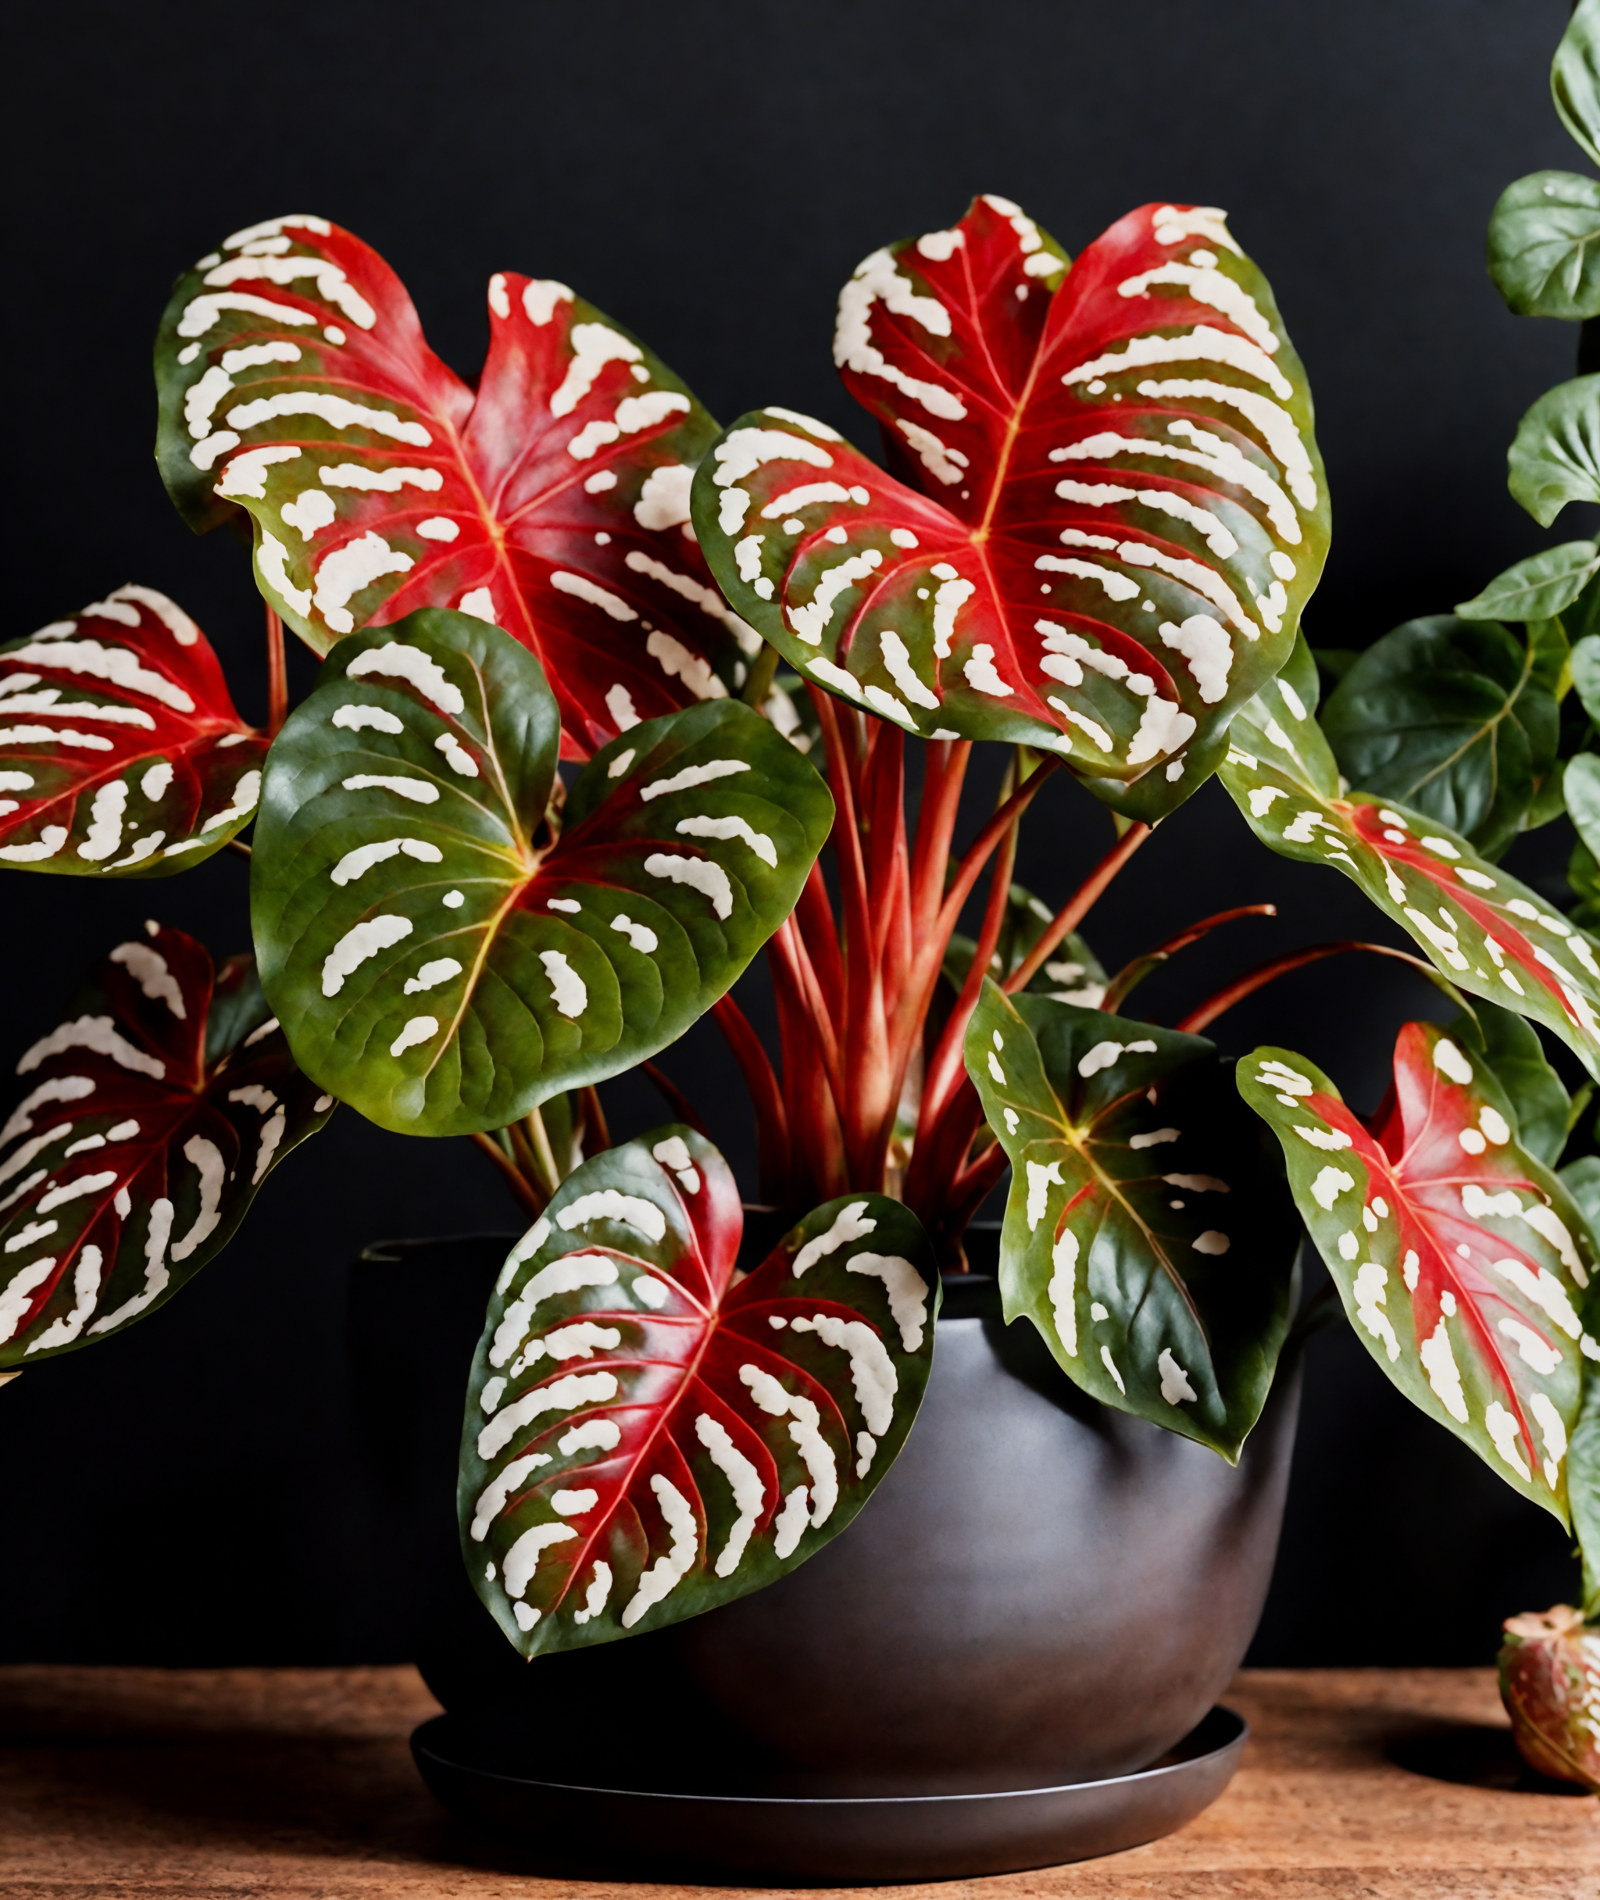 A group of red Caladium bicolor leaves in a brown bowl on a wooden table, with clear lighting and a dark background.